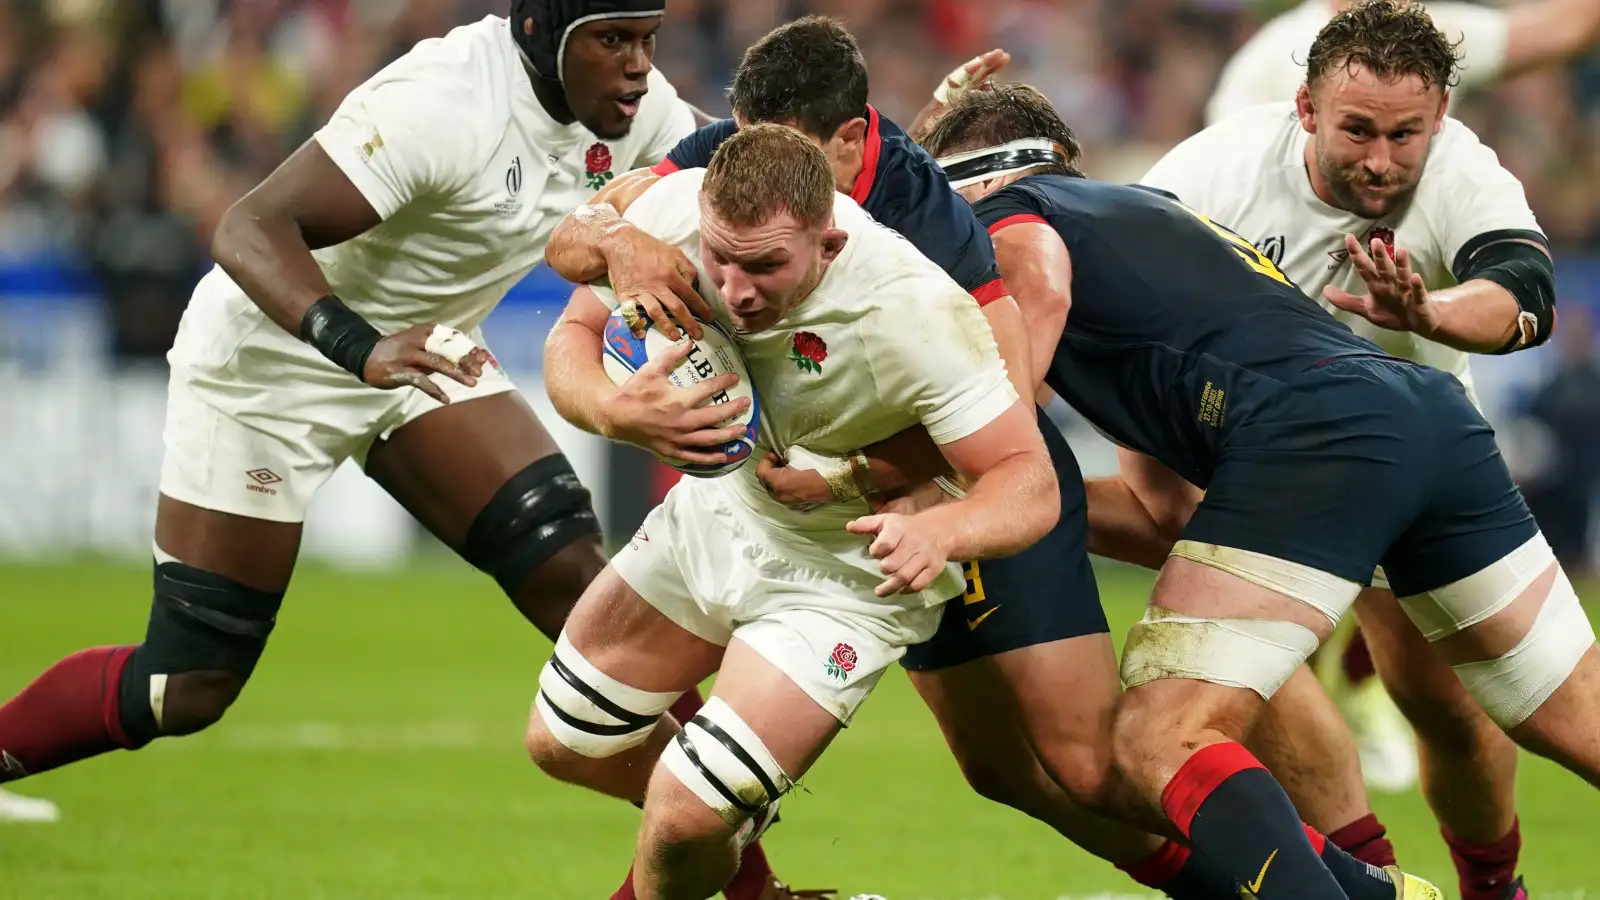 Sam Underhill in action for England v Argentina in the Rugby World Cup.